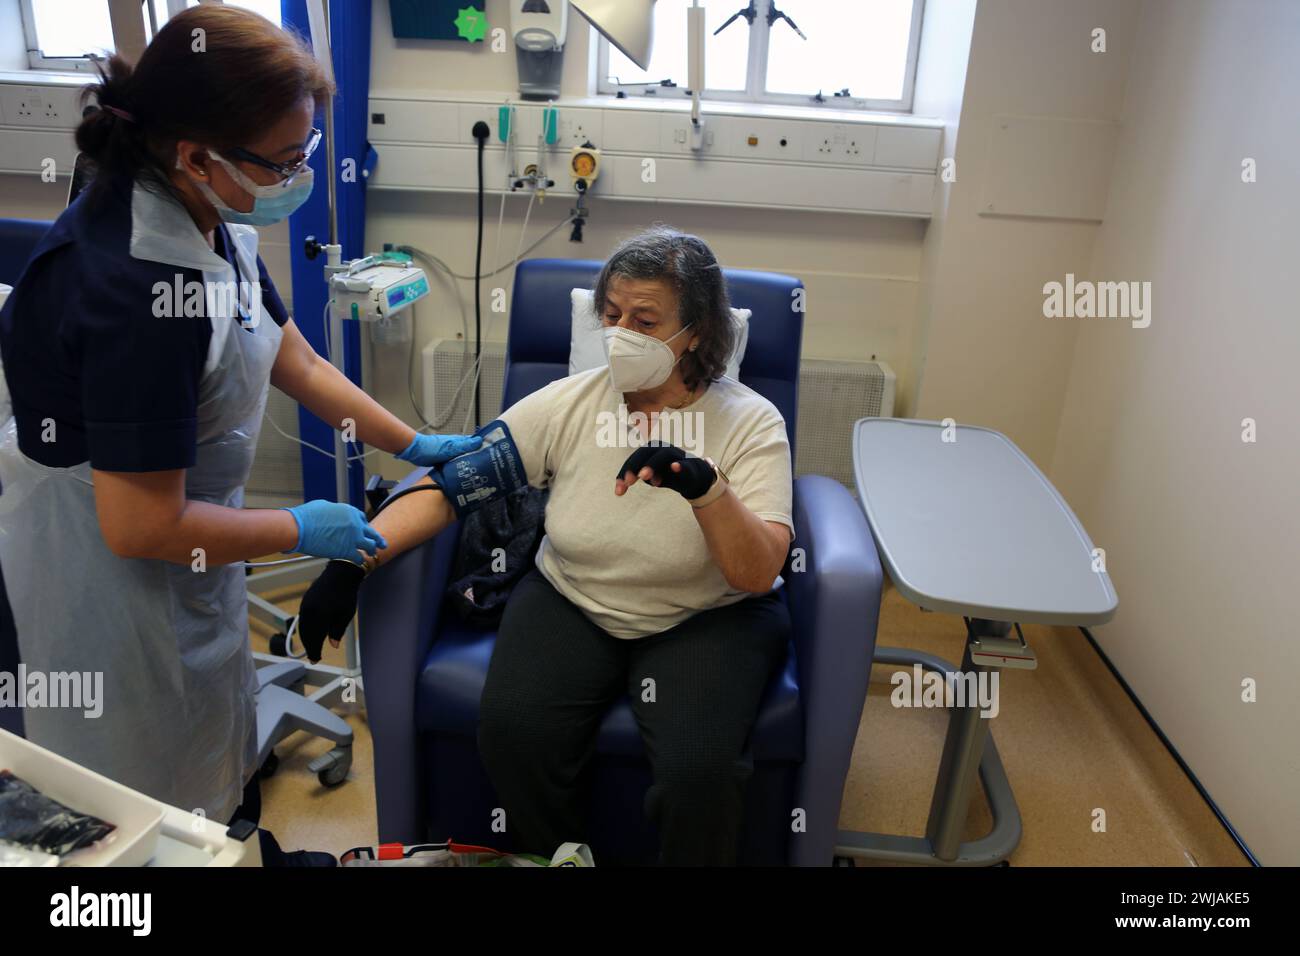 Nurse Using Blood Pressure Cuff on Patient before Administering an Iron Infusion At Hospital Surrey England Stock Photo